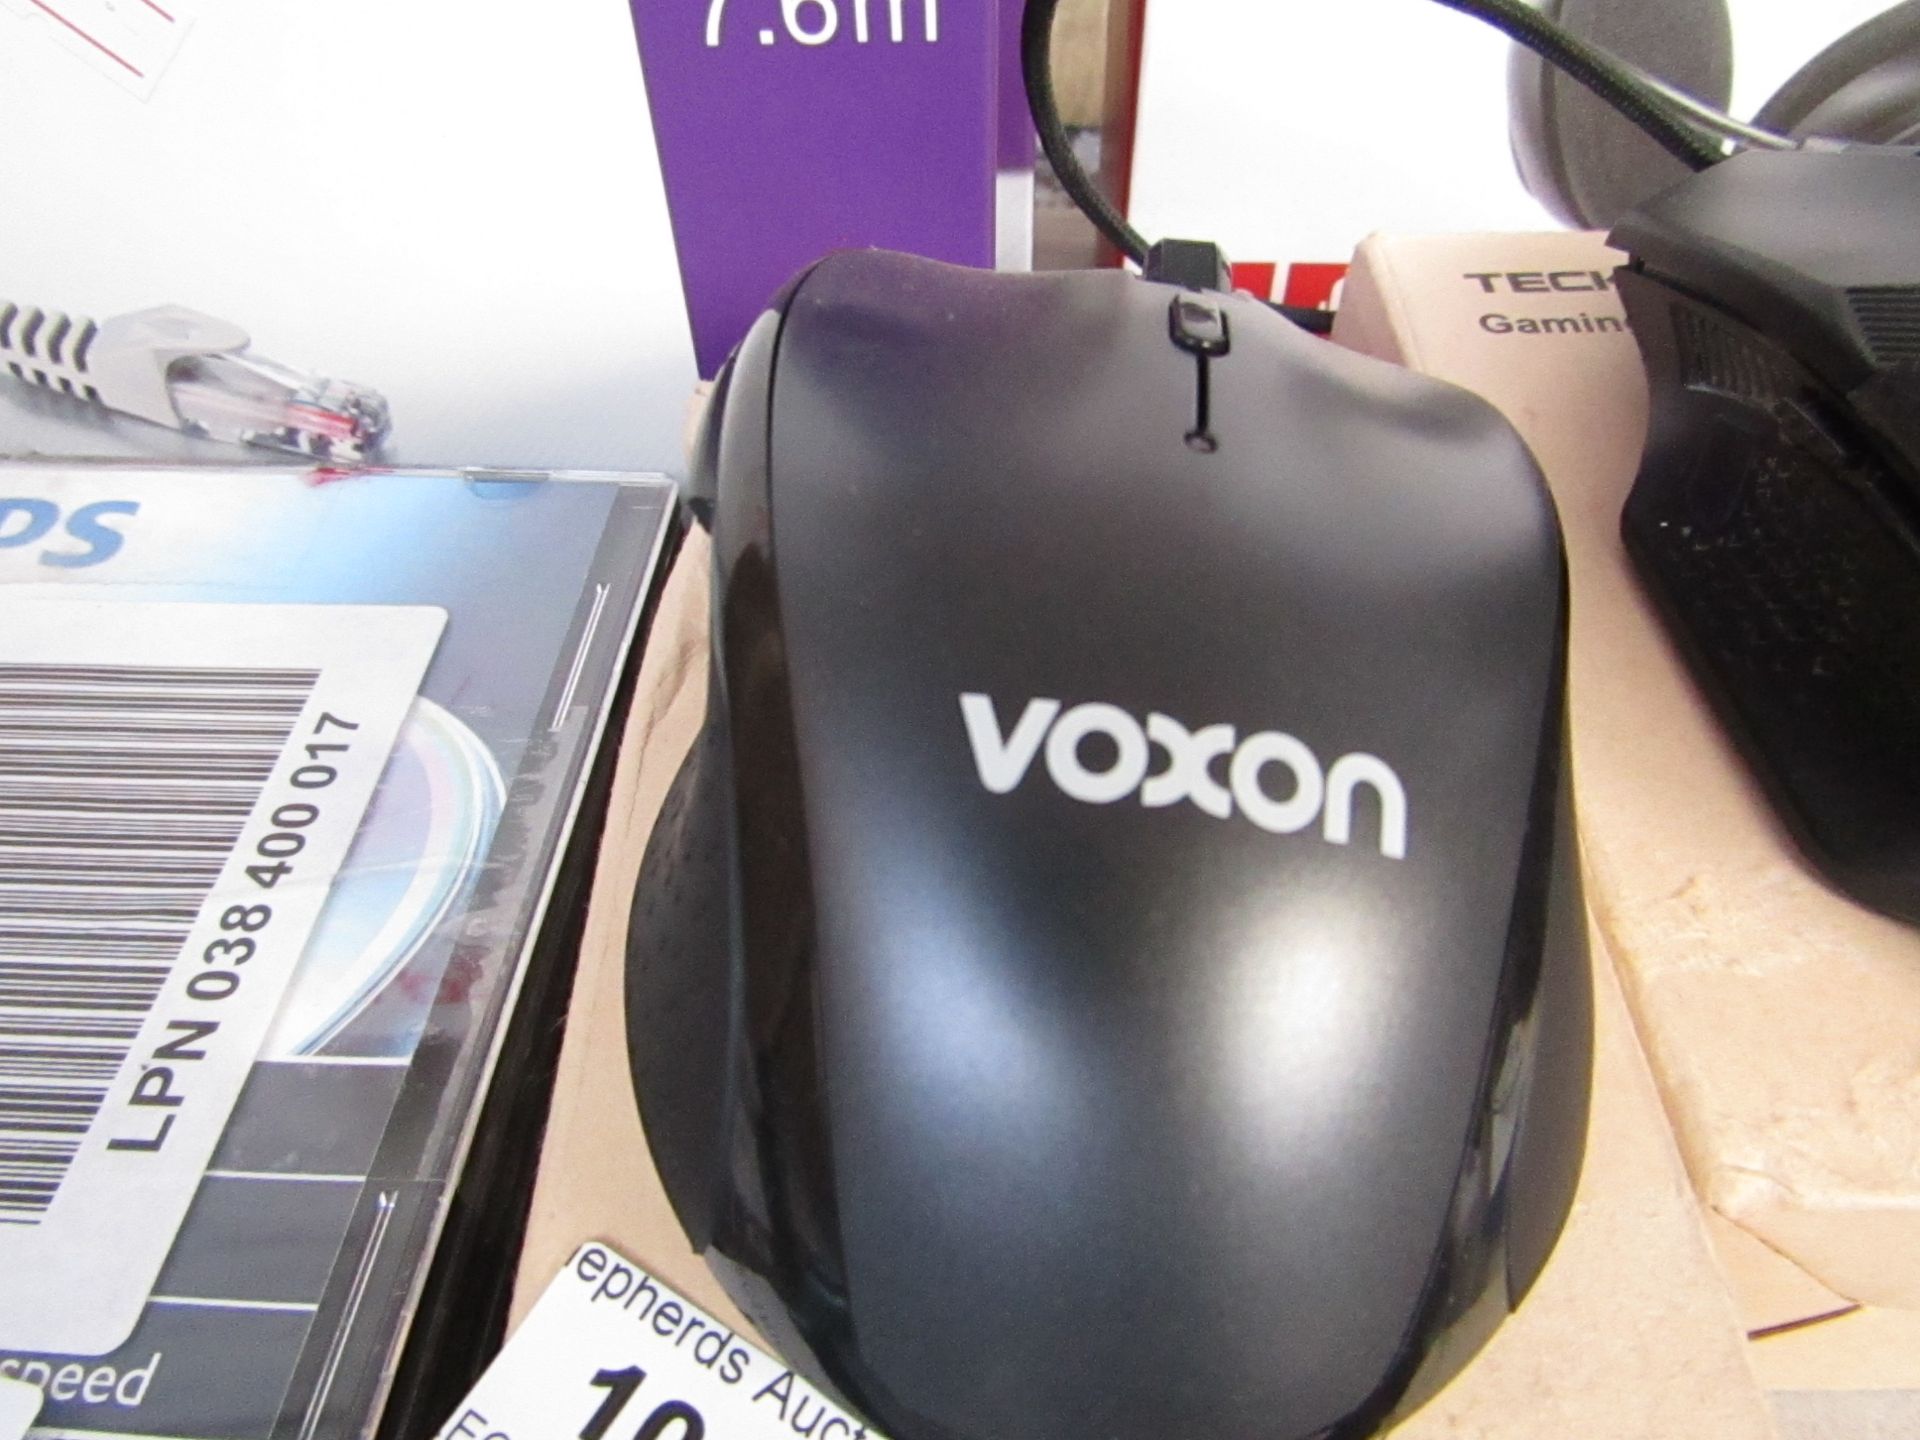 Voxon gaming mouse, untested and boxed.